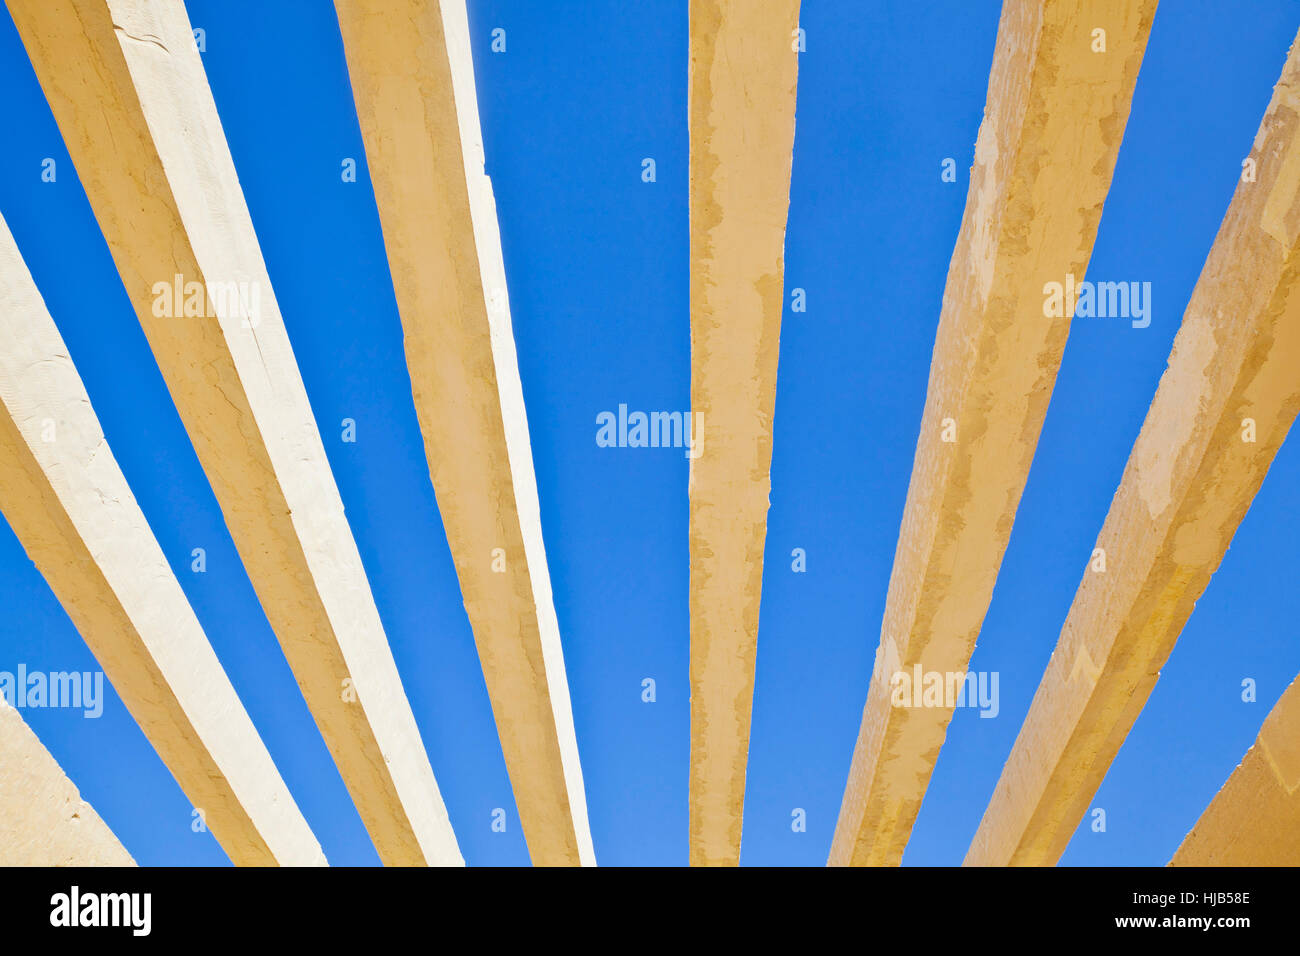 Horizontal detail of architecture to the roof of the public acces to Shree Dwarakadheesh Krishna Temple at Dwarka Gujarat India. With no shelter creats an abstract patten of the concrete box work against the rich blue sky withour clouds Stock Photo